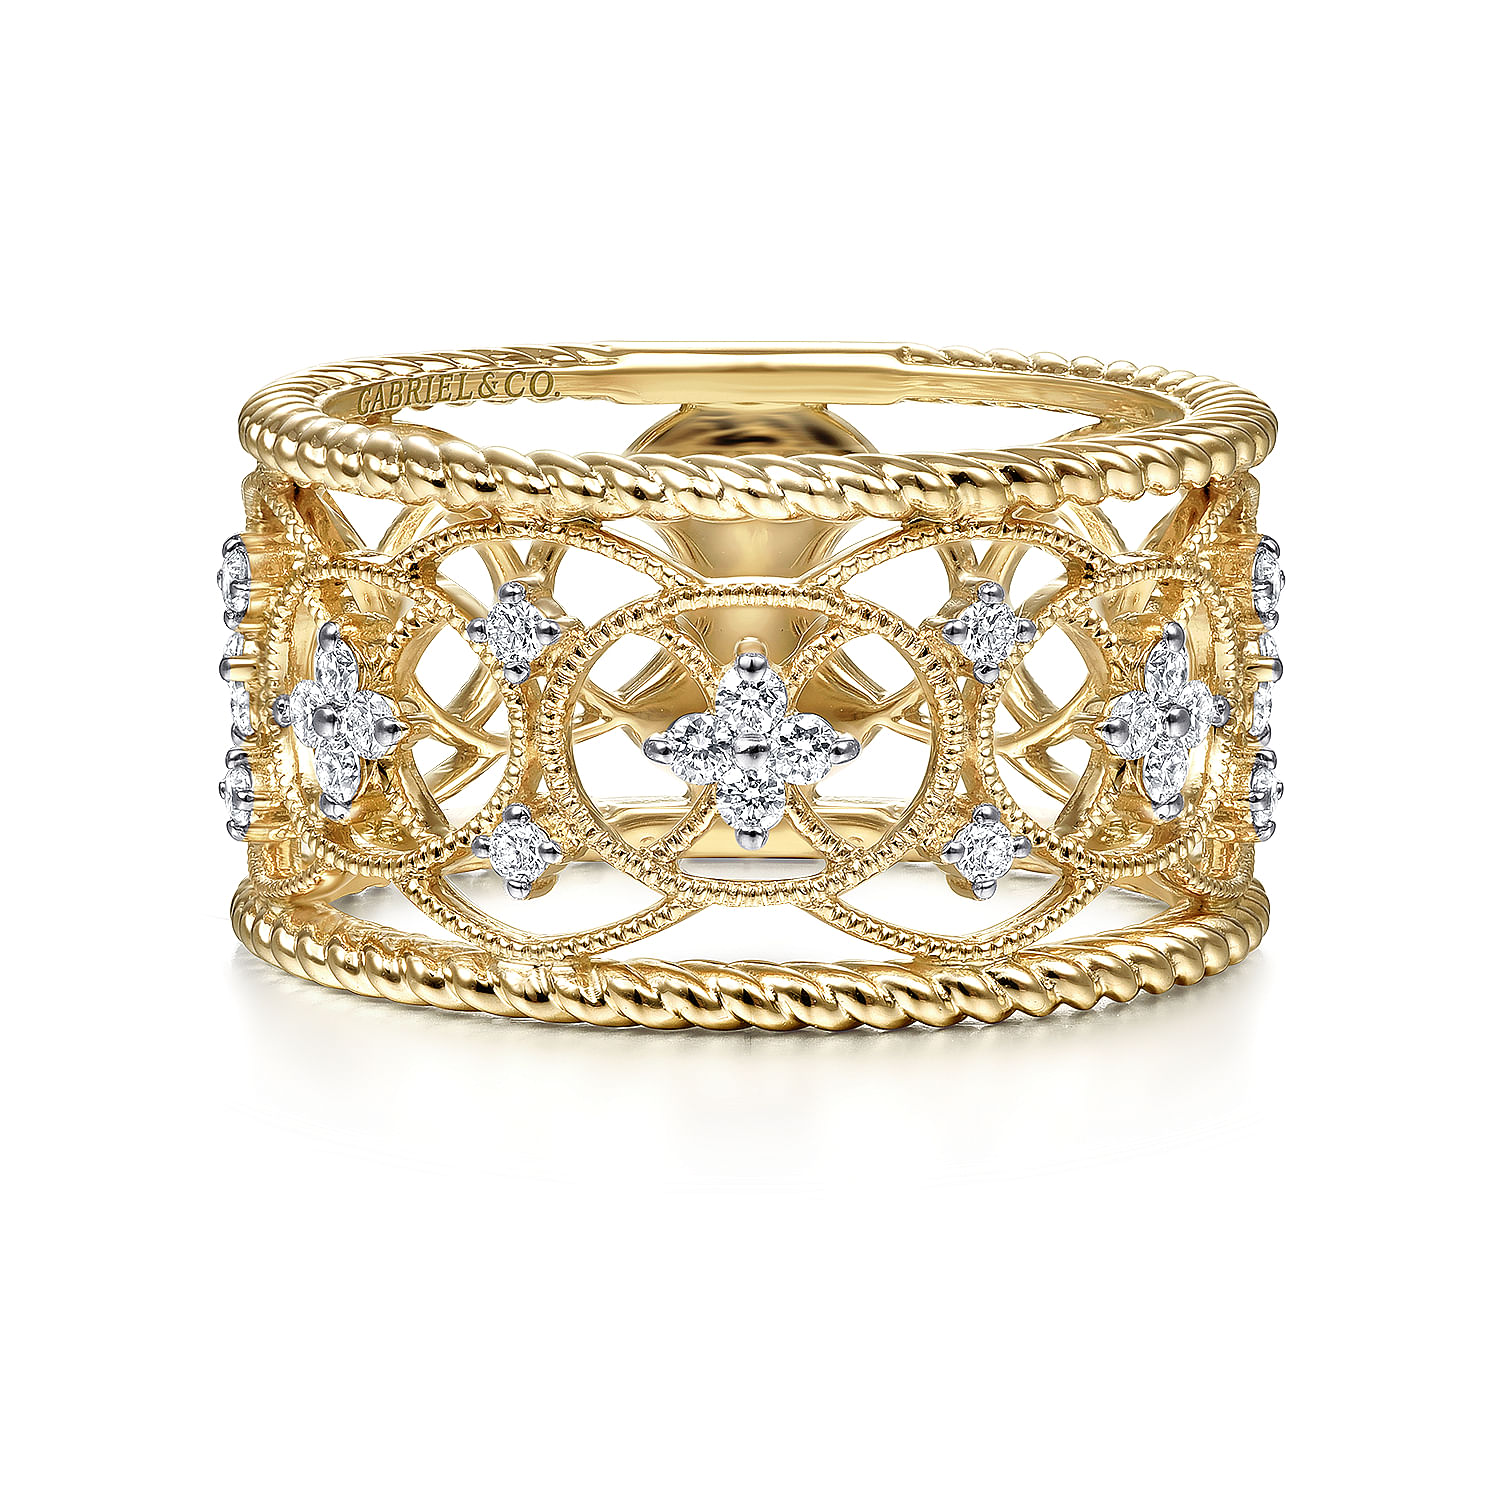 Gabriel - 14K Yellow Gold Wide Open Work Diamond Ring with Twisted Rope Edge